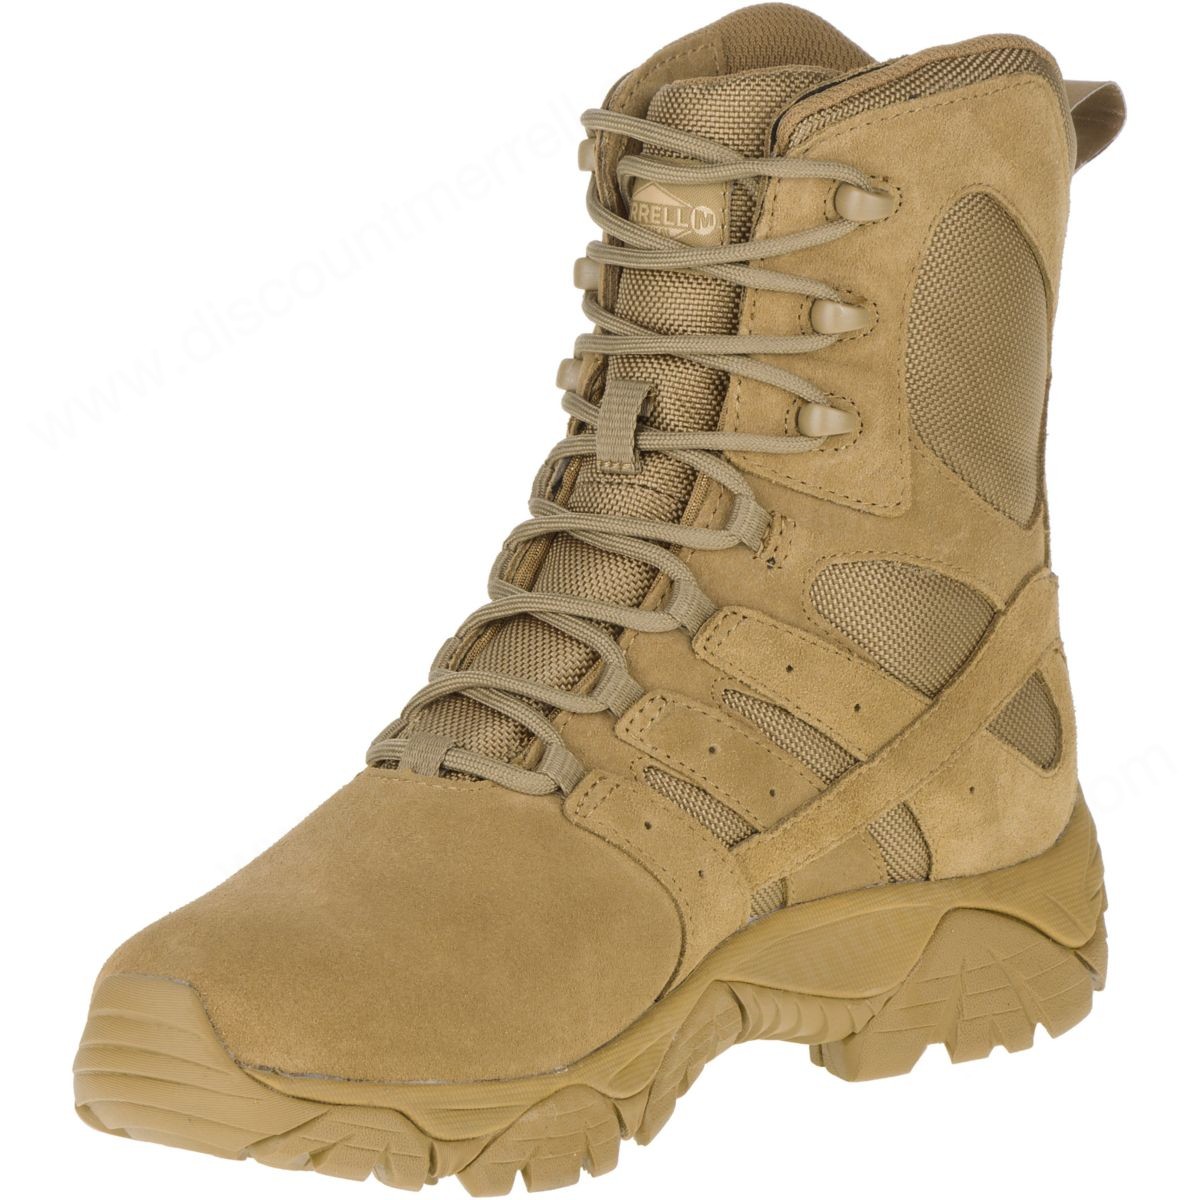 Merrell Lady's Moab " Tactical Defense Boot Coyote - -5